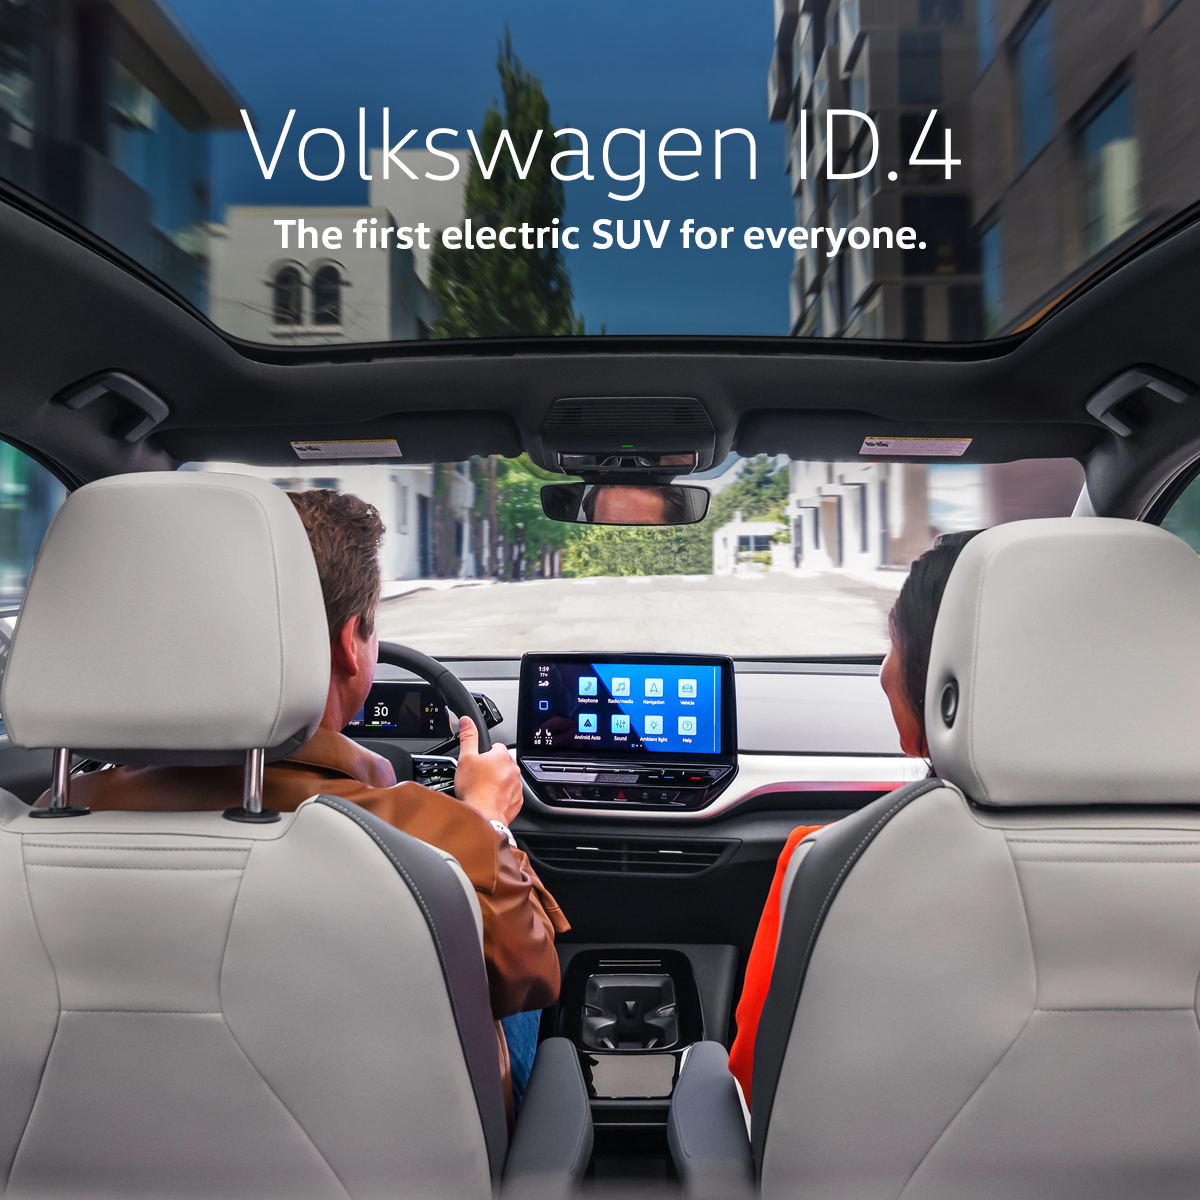 Be adventure-ready with a range of up to 310 miles ⚡️ in the all-new ID.4. Delivered to you with a carbon-neutral balance. 100% SUV. 100% electric.

Shop Here: bit.ly/CM23Id4

#id4 #vwid4 #volkswagen #vw #electricSUV #eSUV #WayToZero